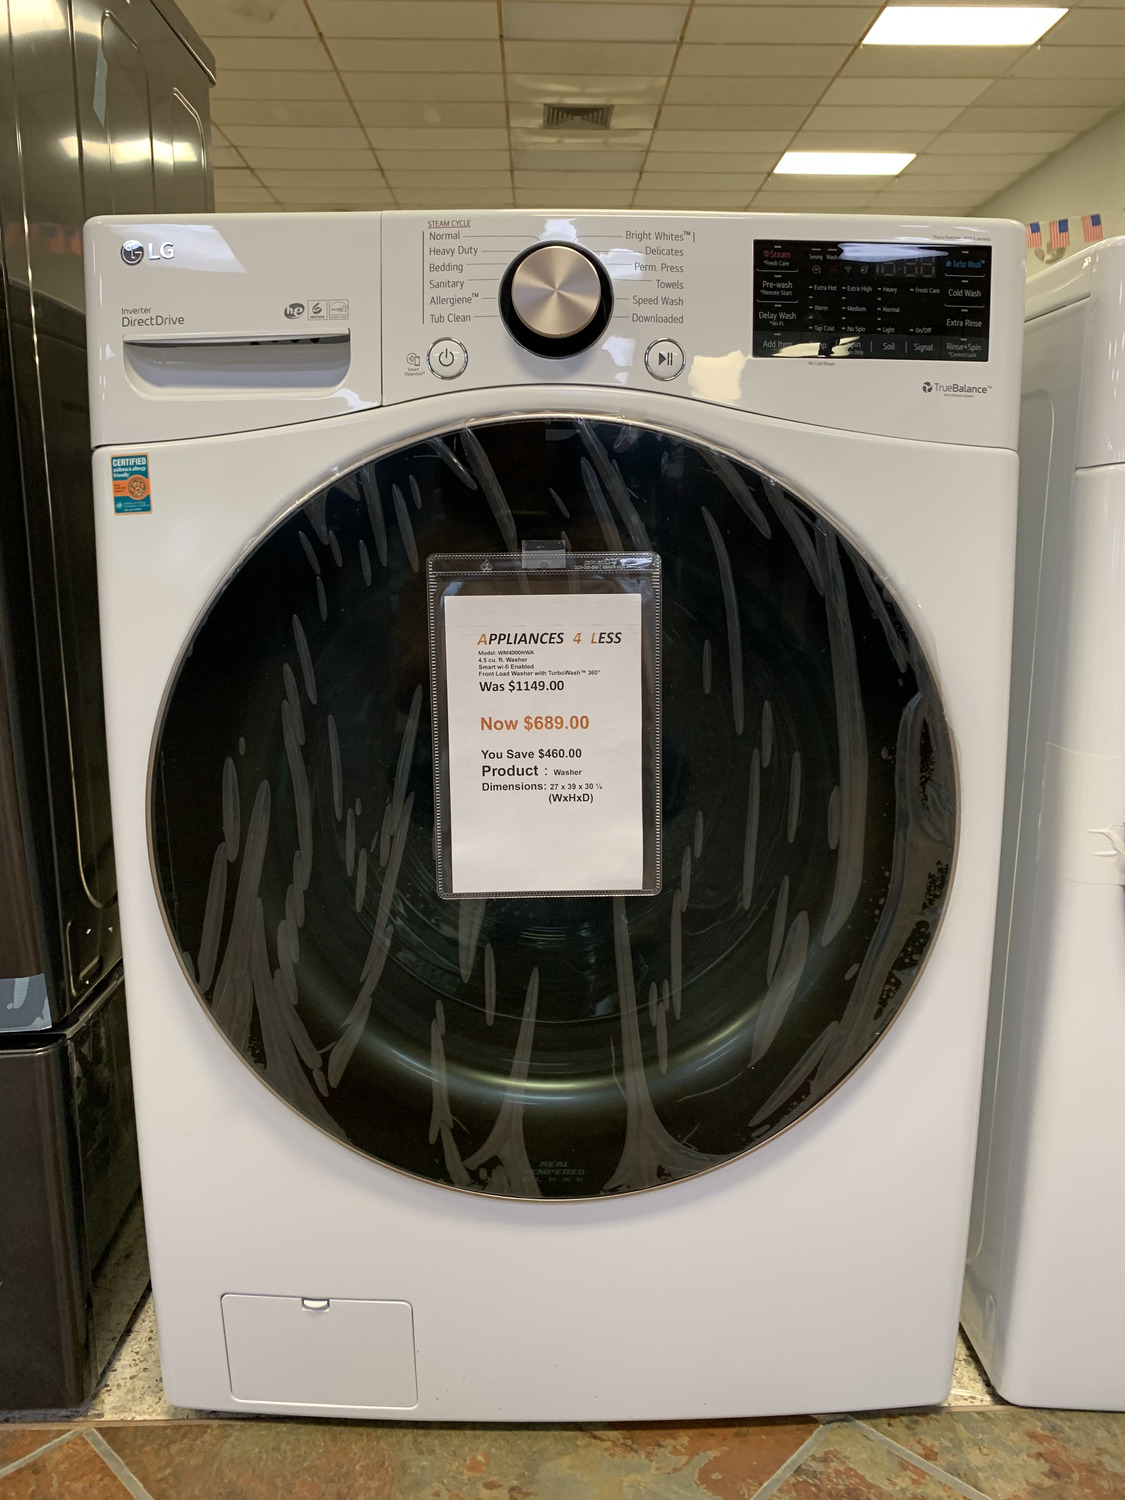 4.5 cu.ft. Smart Front Load Washer with TurboWash® 360°, Built-In  Intelligence and ezDispense®